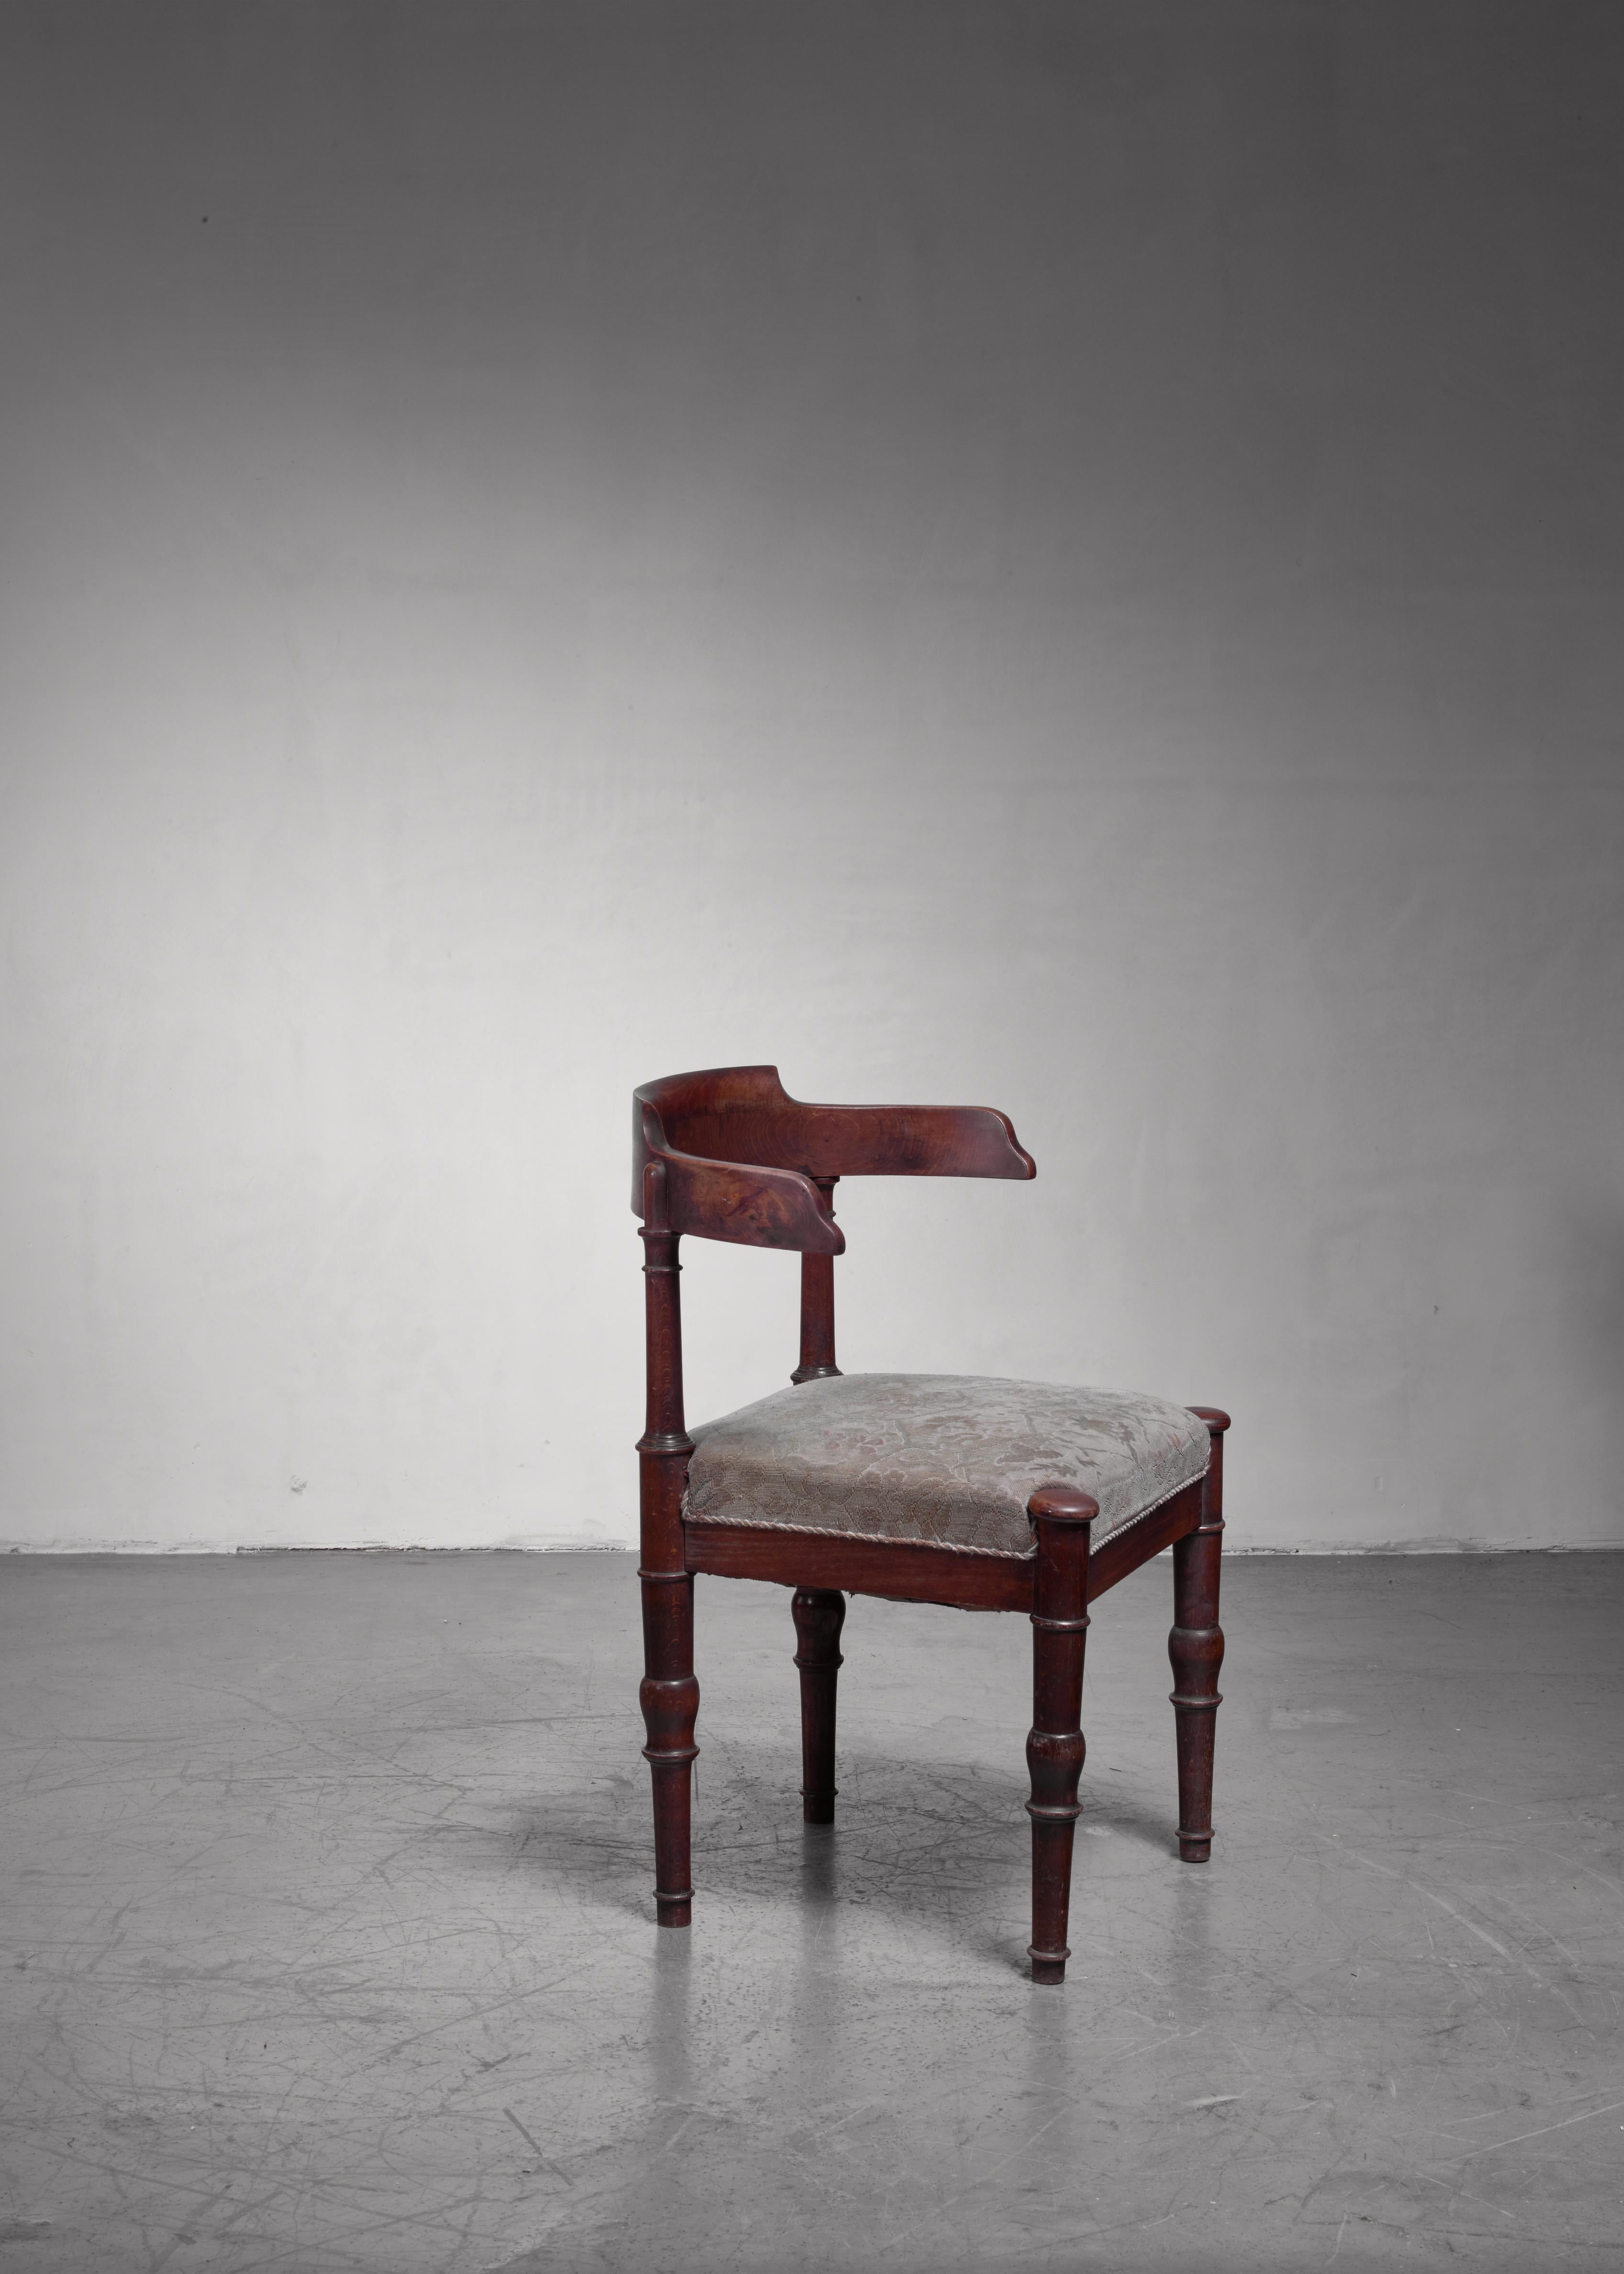 An early 20th century Danish artist chair made of stained beech with a seat upholstered with patterned fabric. The chair has sculpted feet and a wonderful, curved backrest.